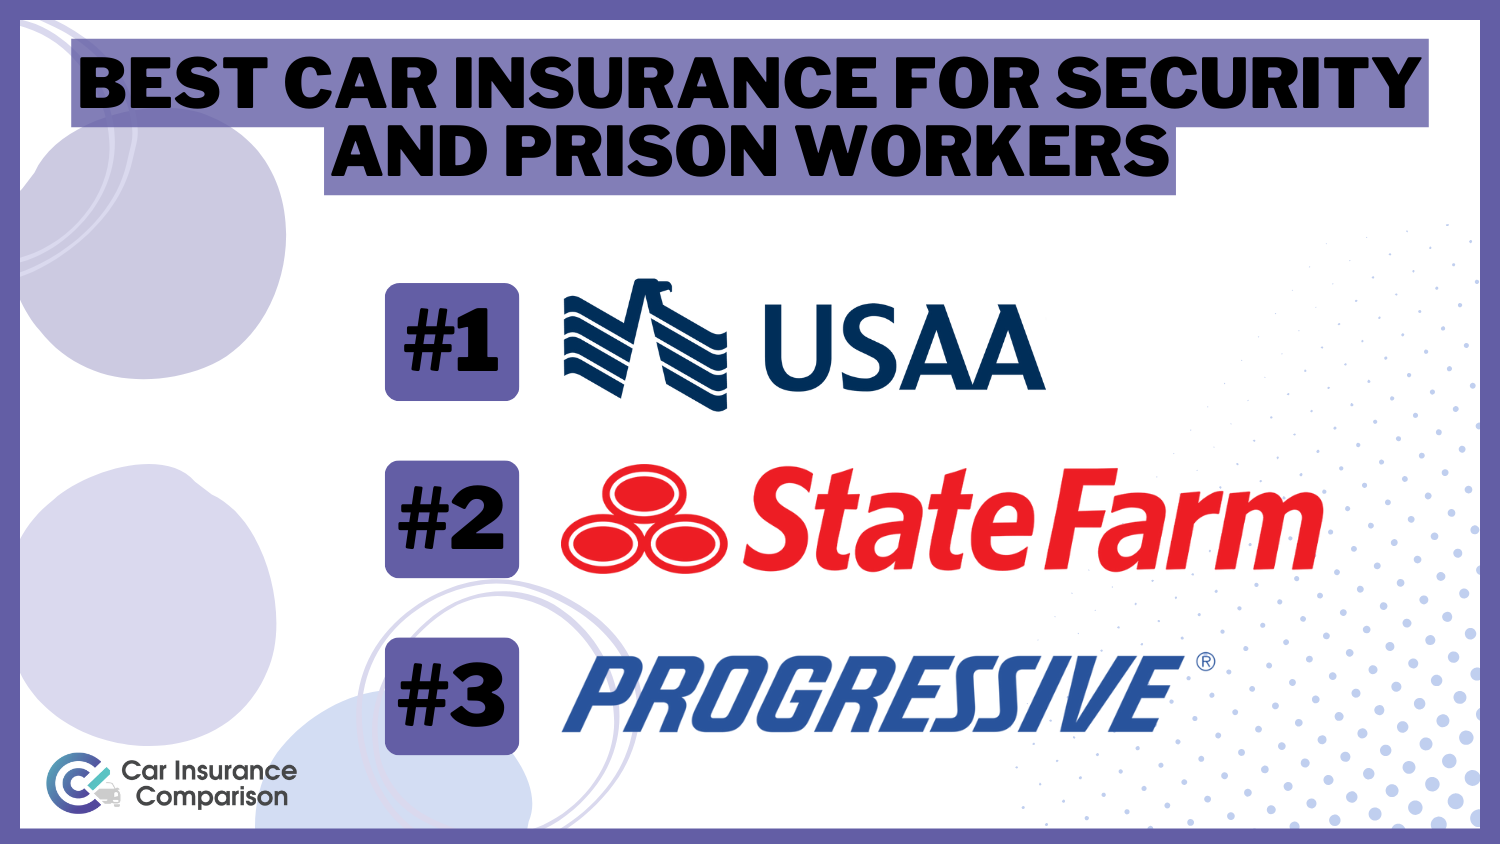 USAA, State Farm, Progressive: Best Car Insurance for Security and Prison Workers